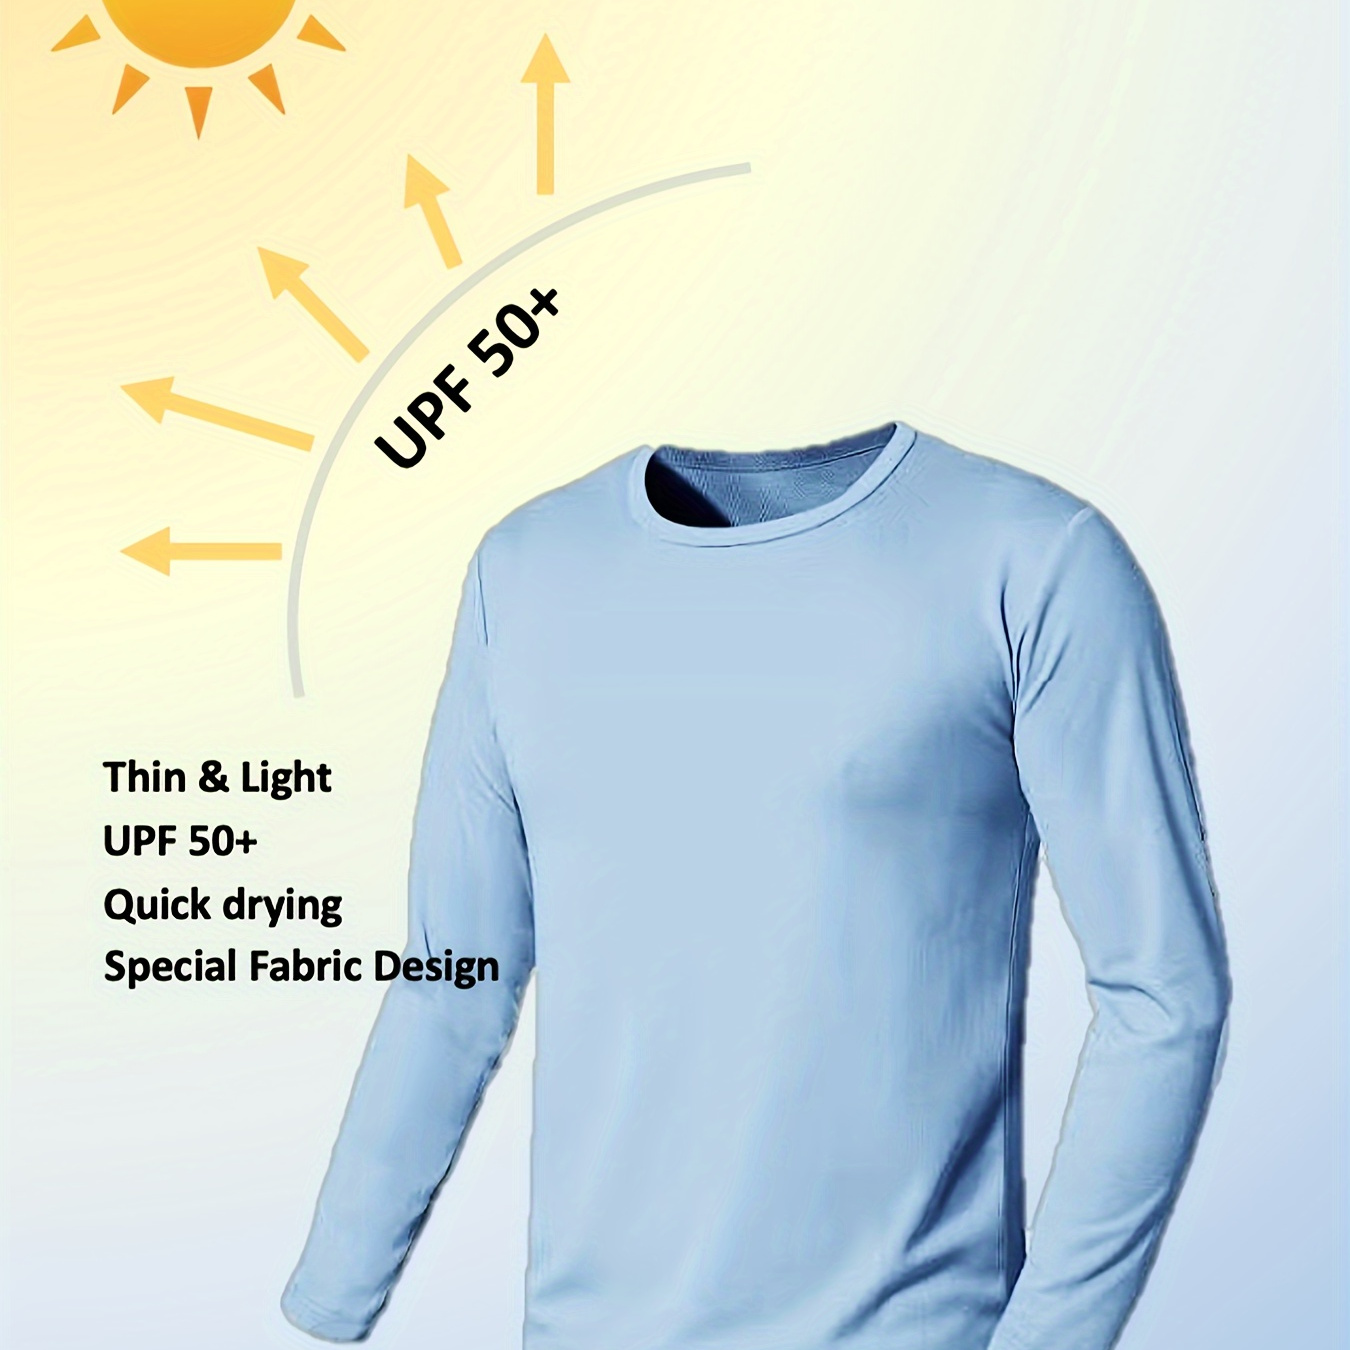 

Men's Solid Long Sleeve Lightweight Quick Dry Round Neck T-shirt, Rash Guard Shirts For Fishing Hiking Outdoor